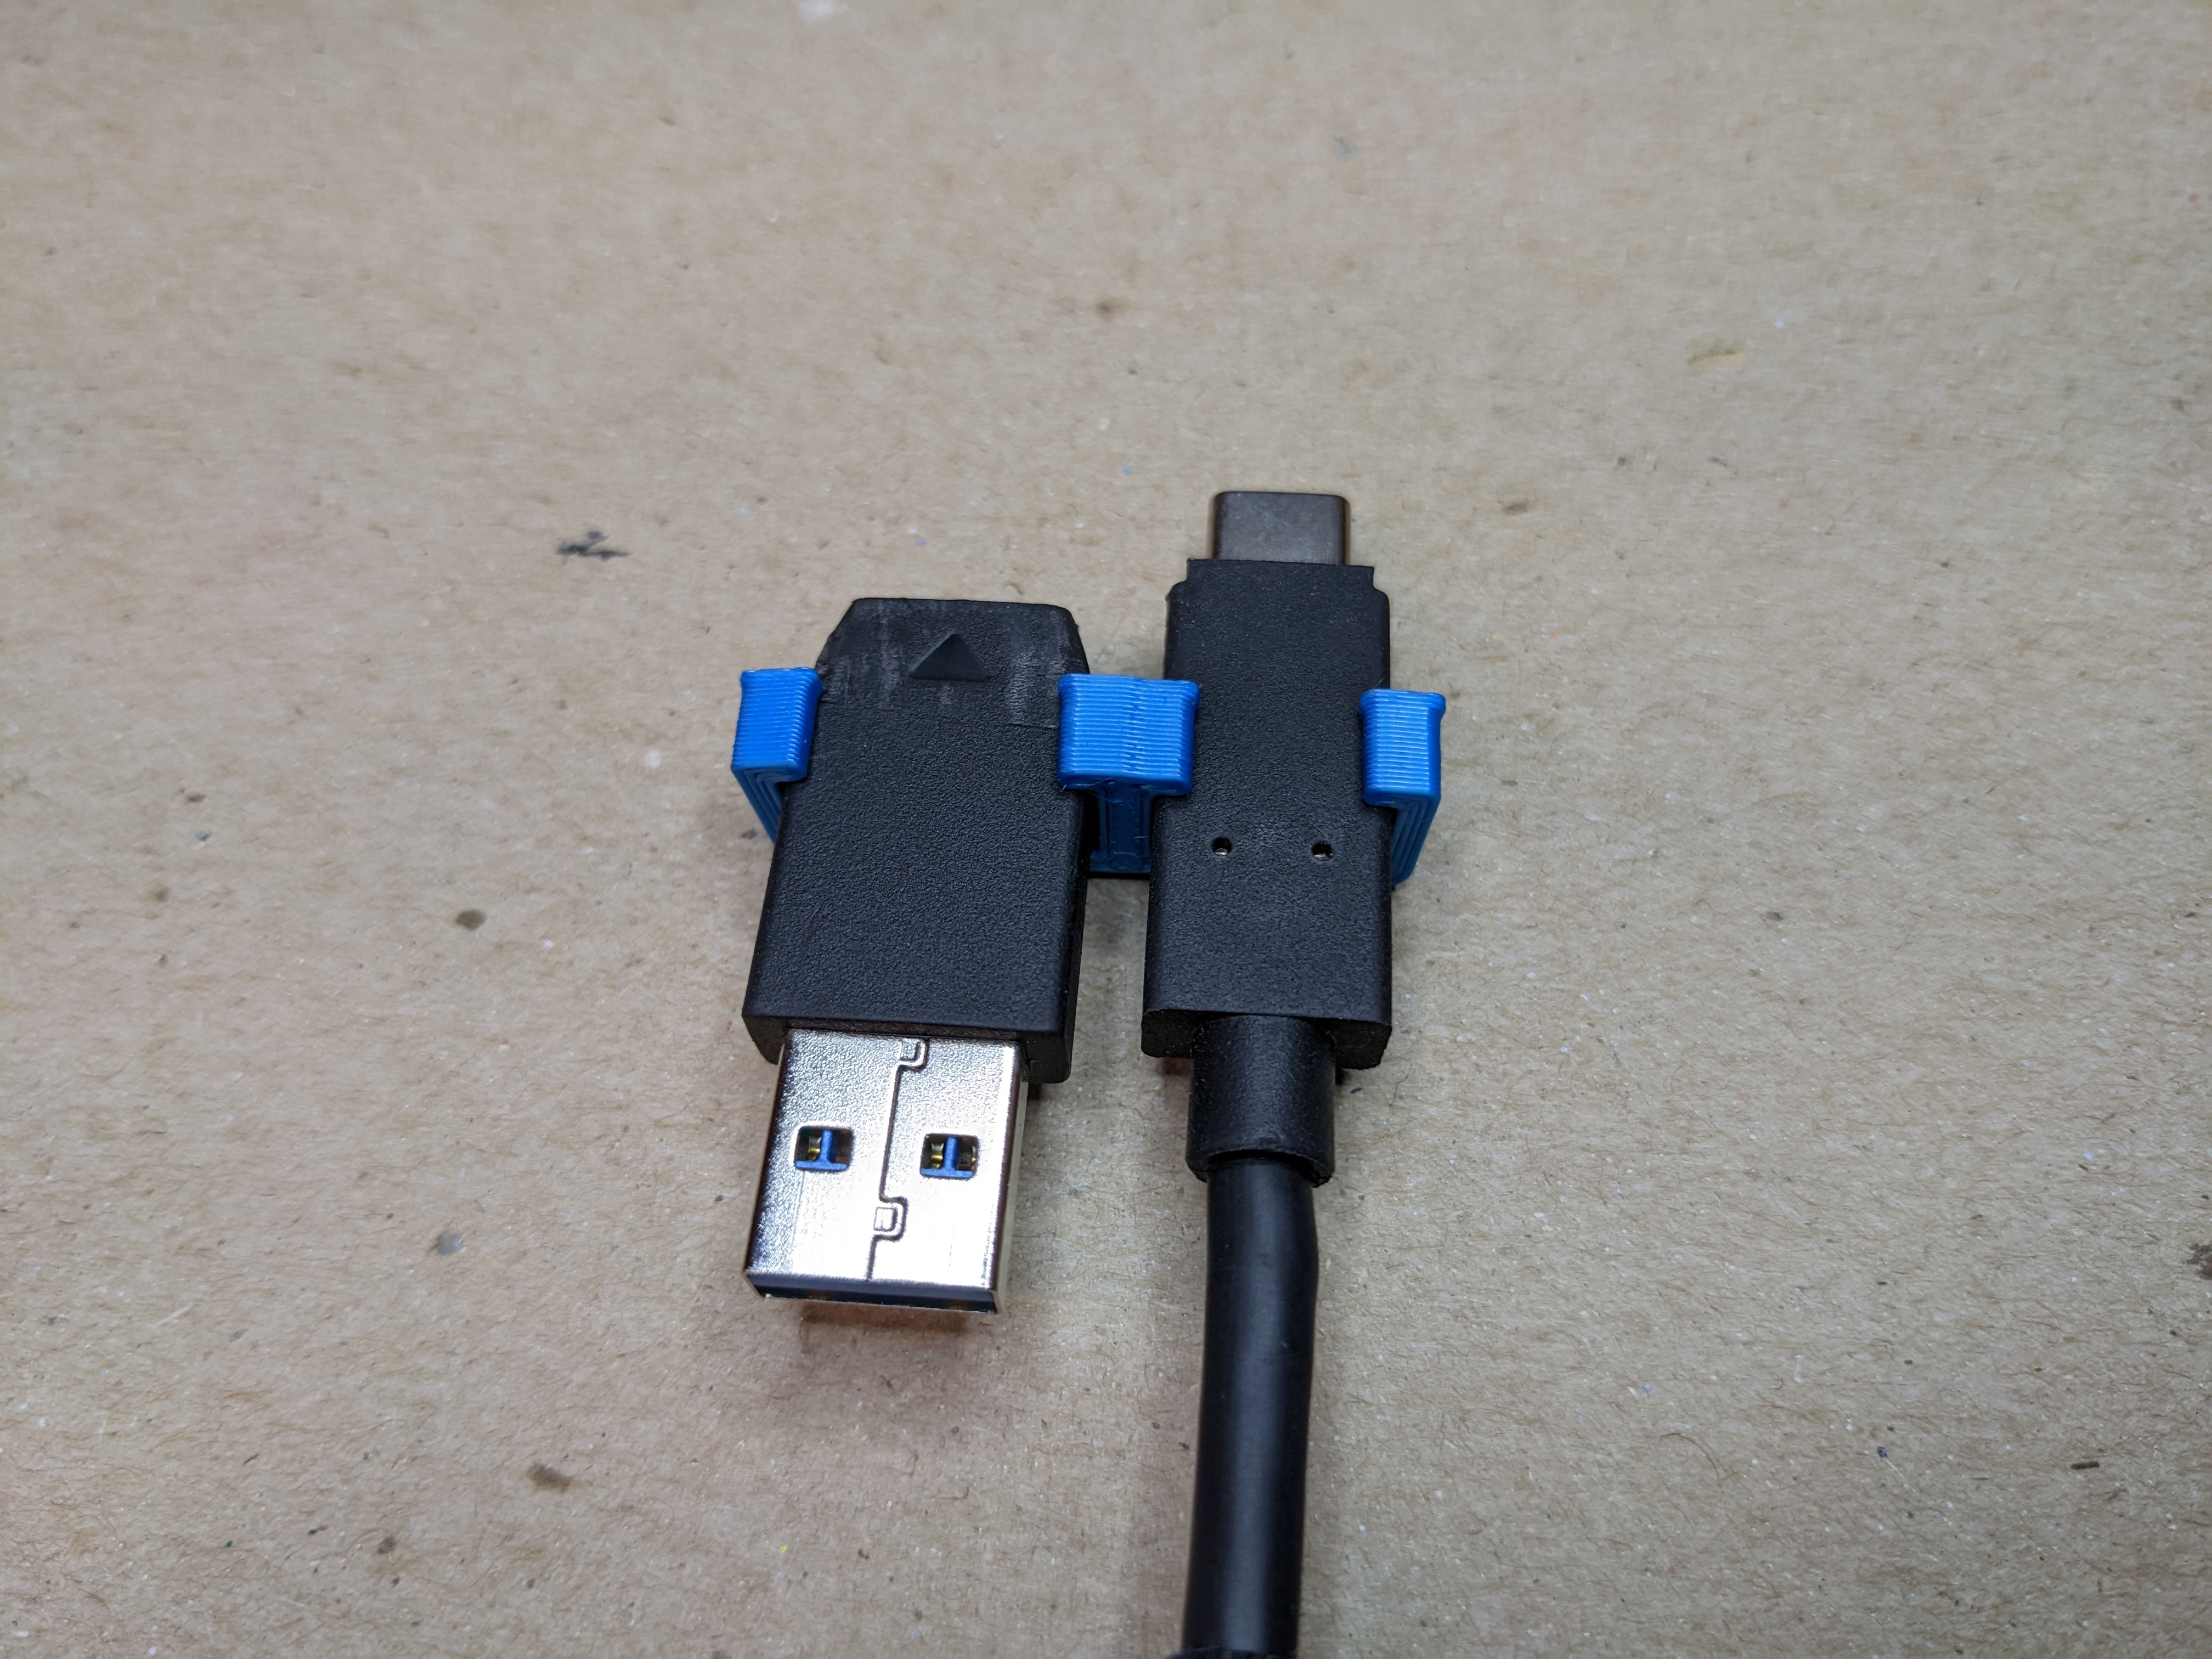 Cable and Adapter Clip for SanDisk Extreme Pro SSD